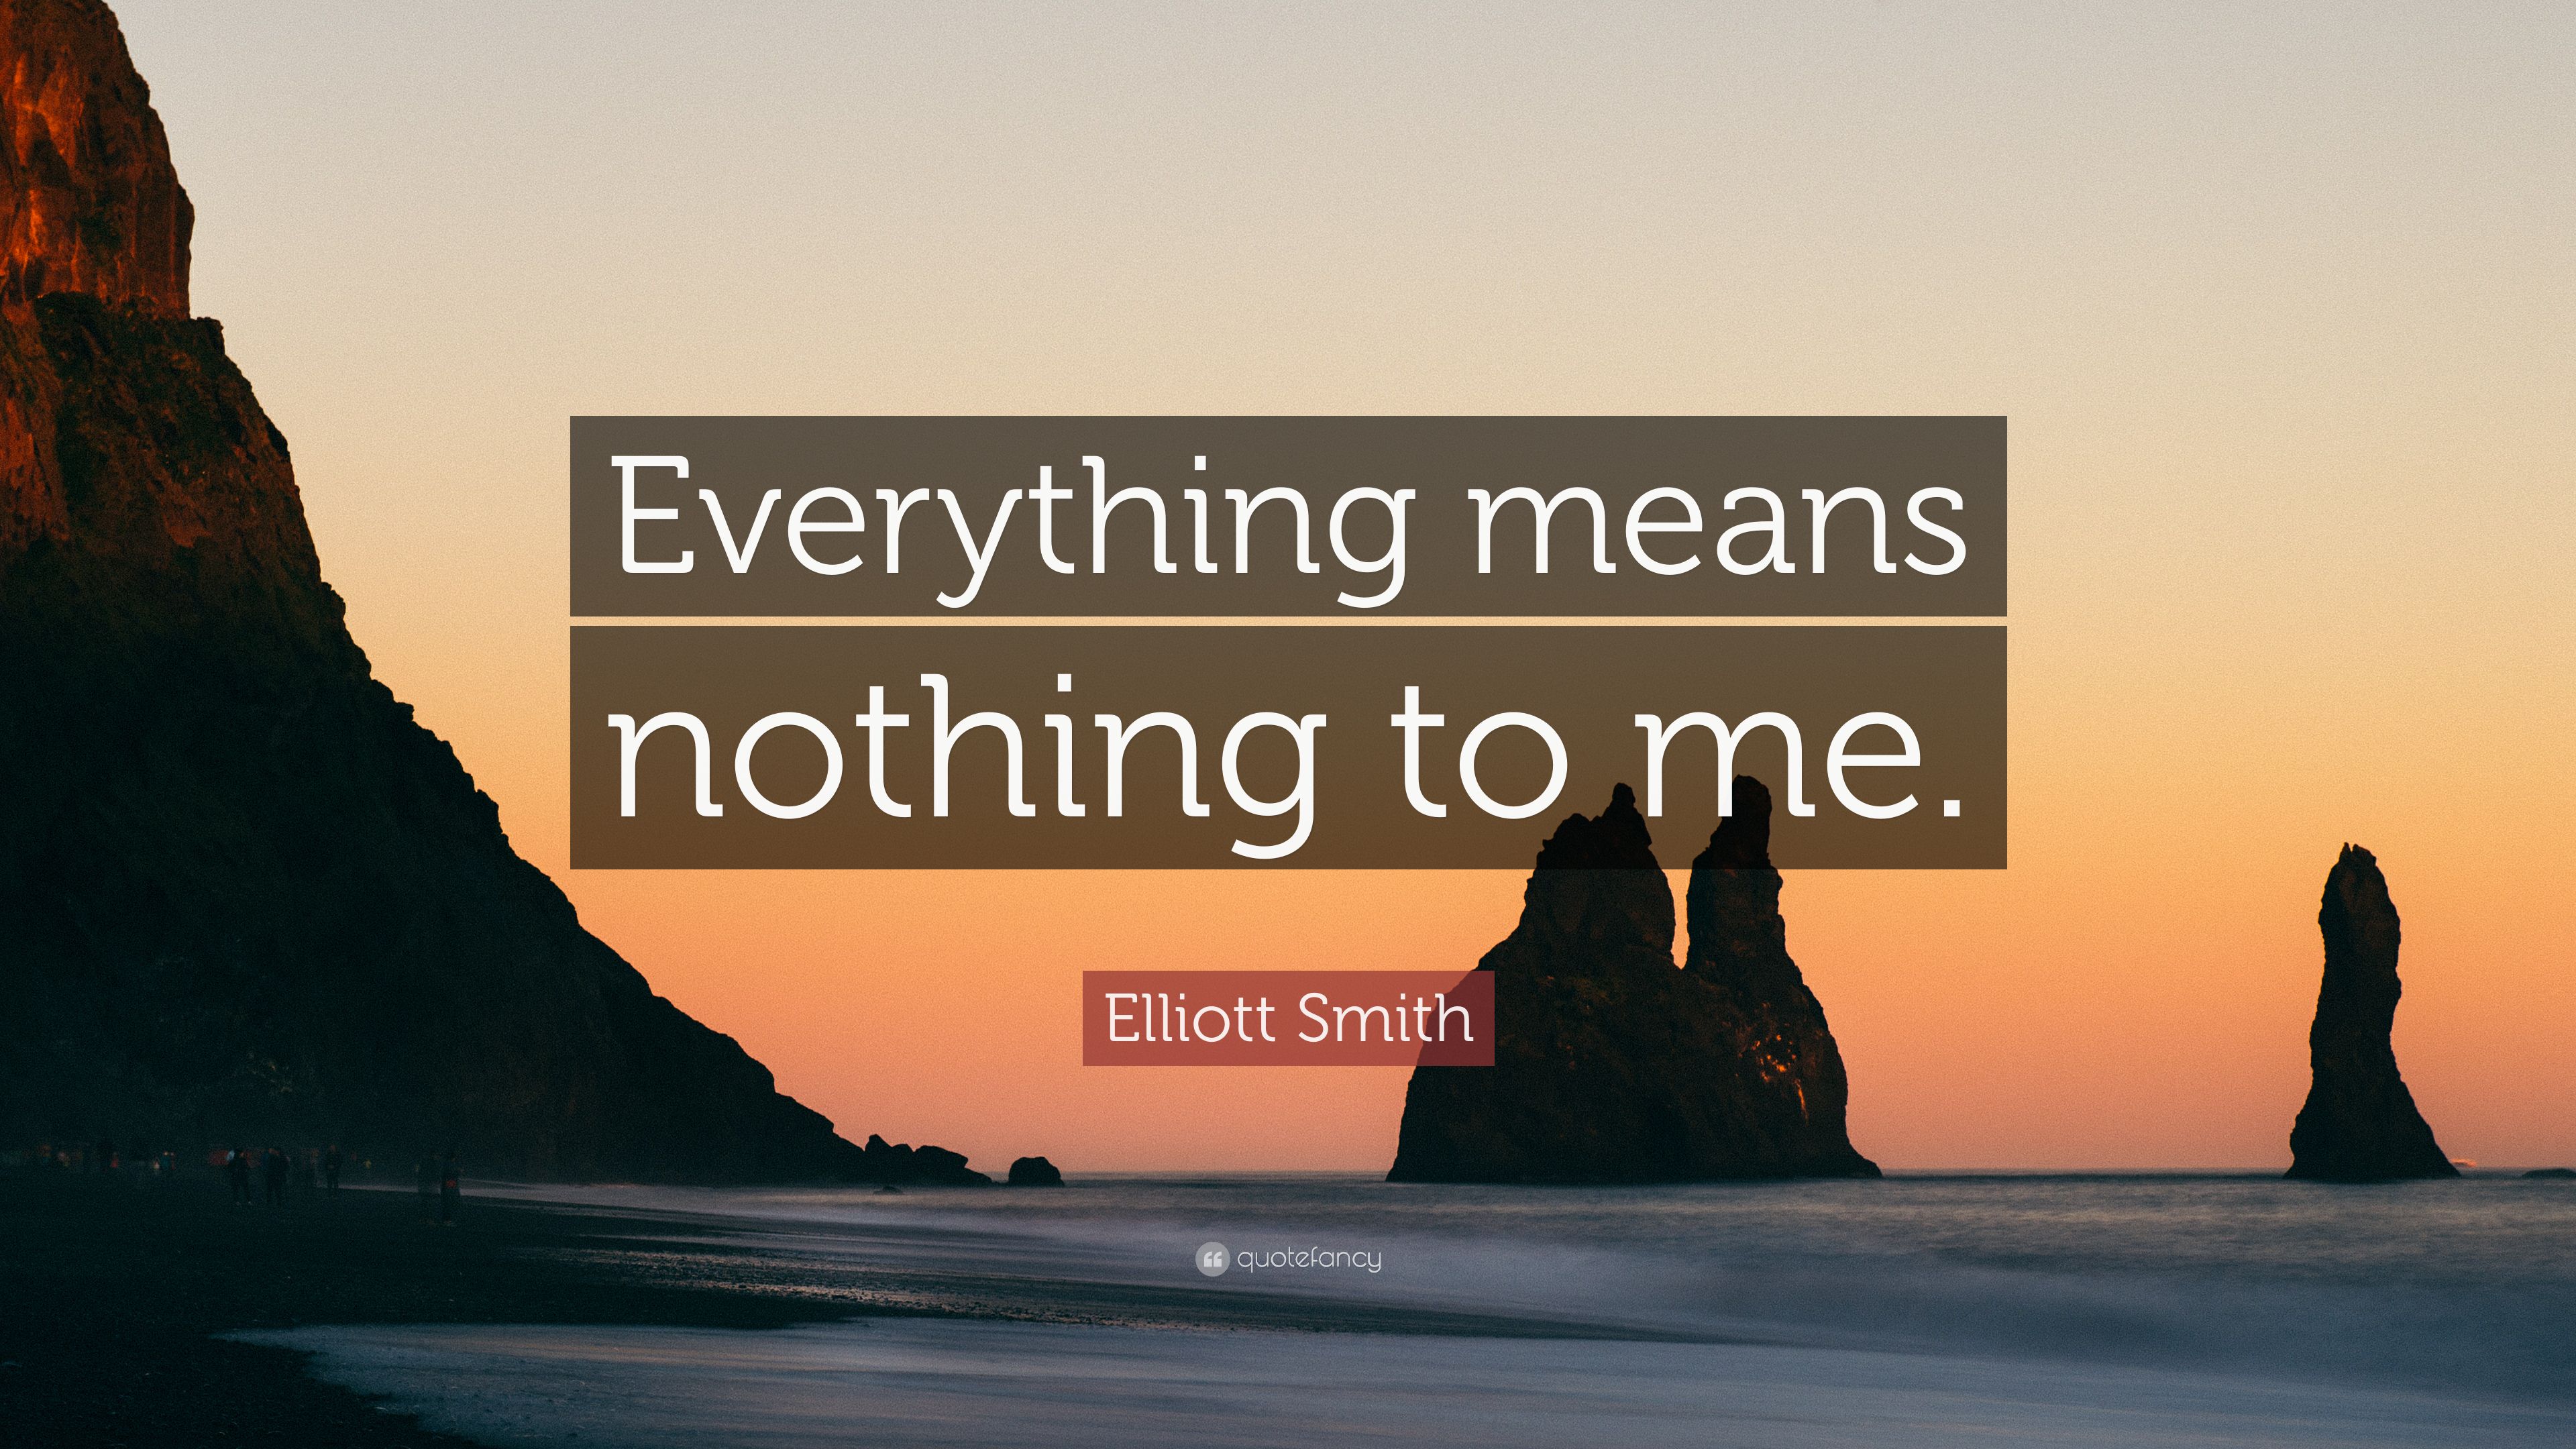 Elliott Smith Quote: “Everything means nothing to me.” (7 wallpaper)